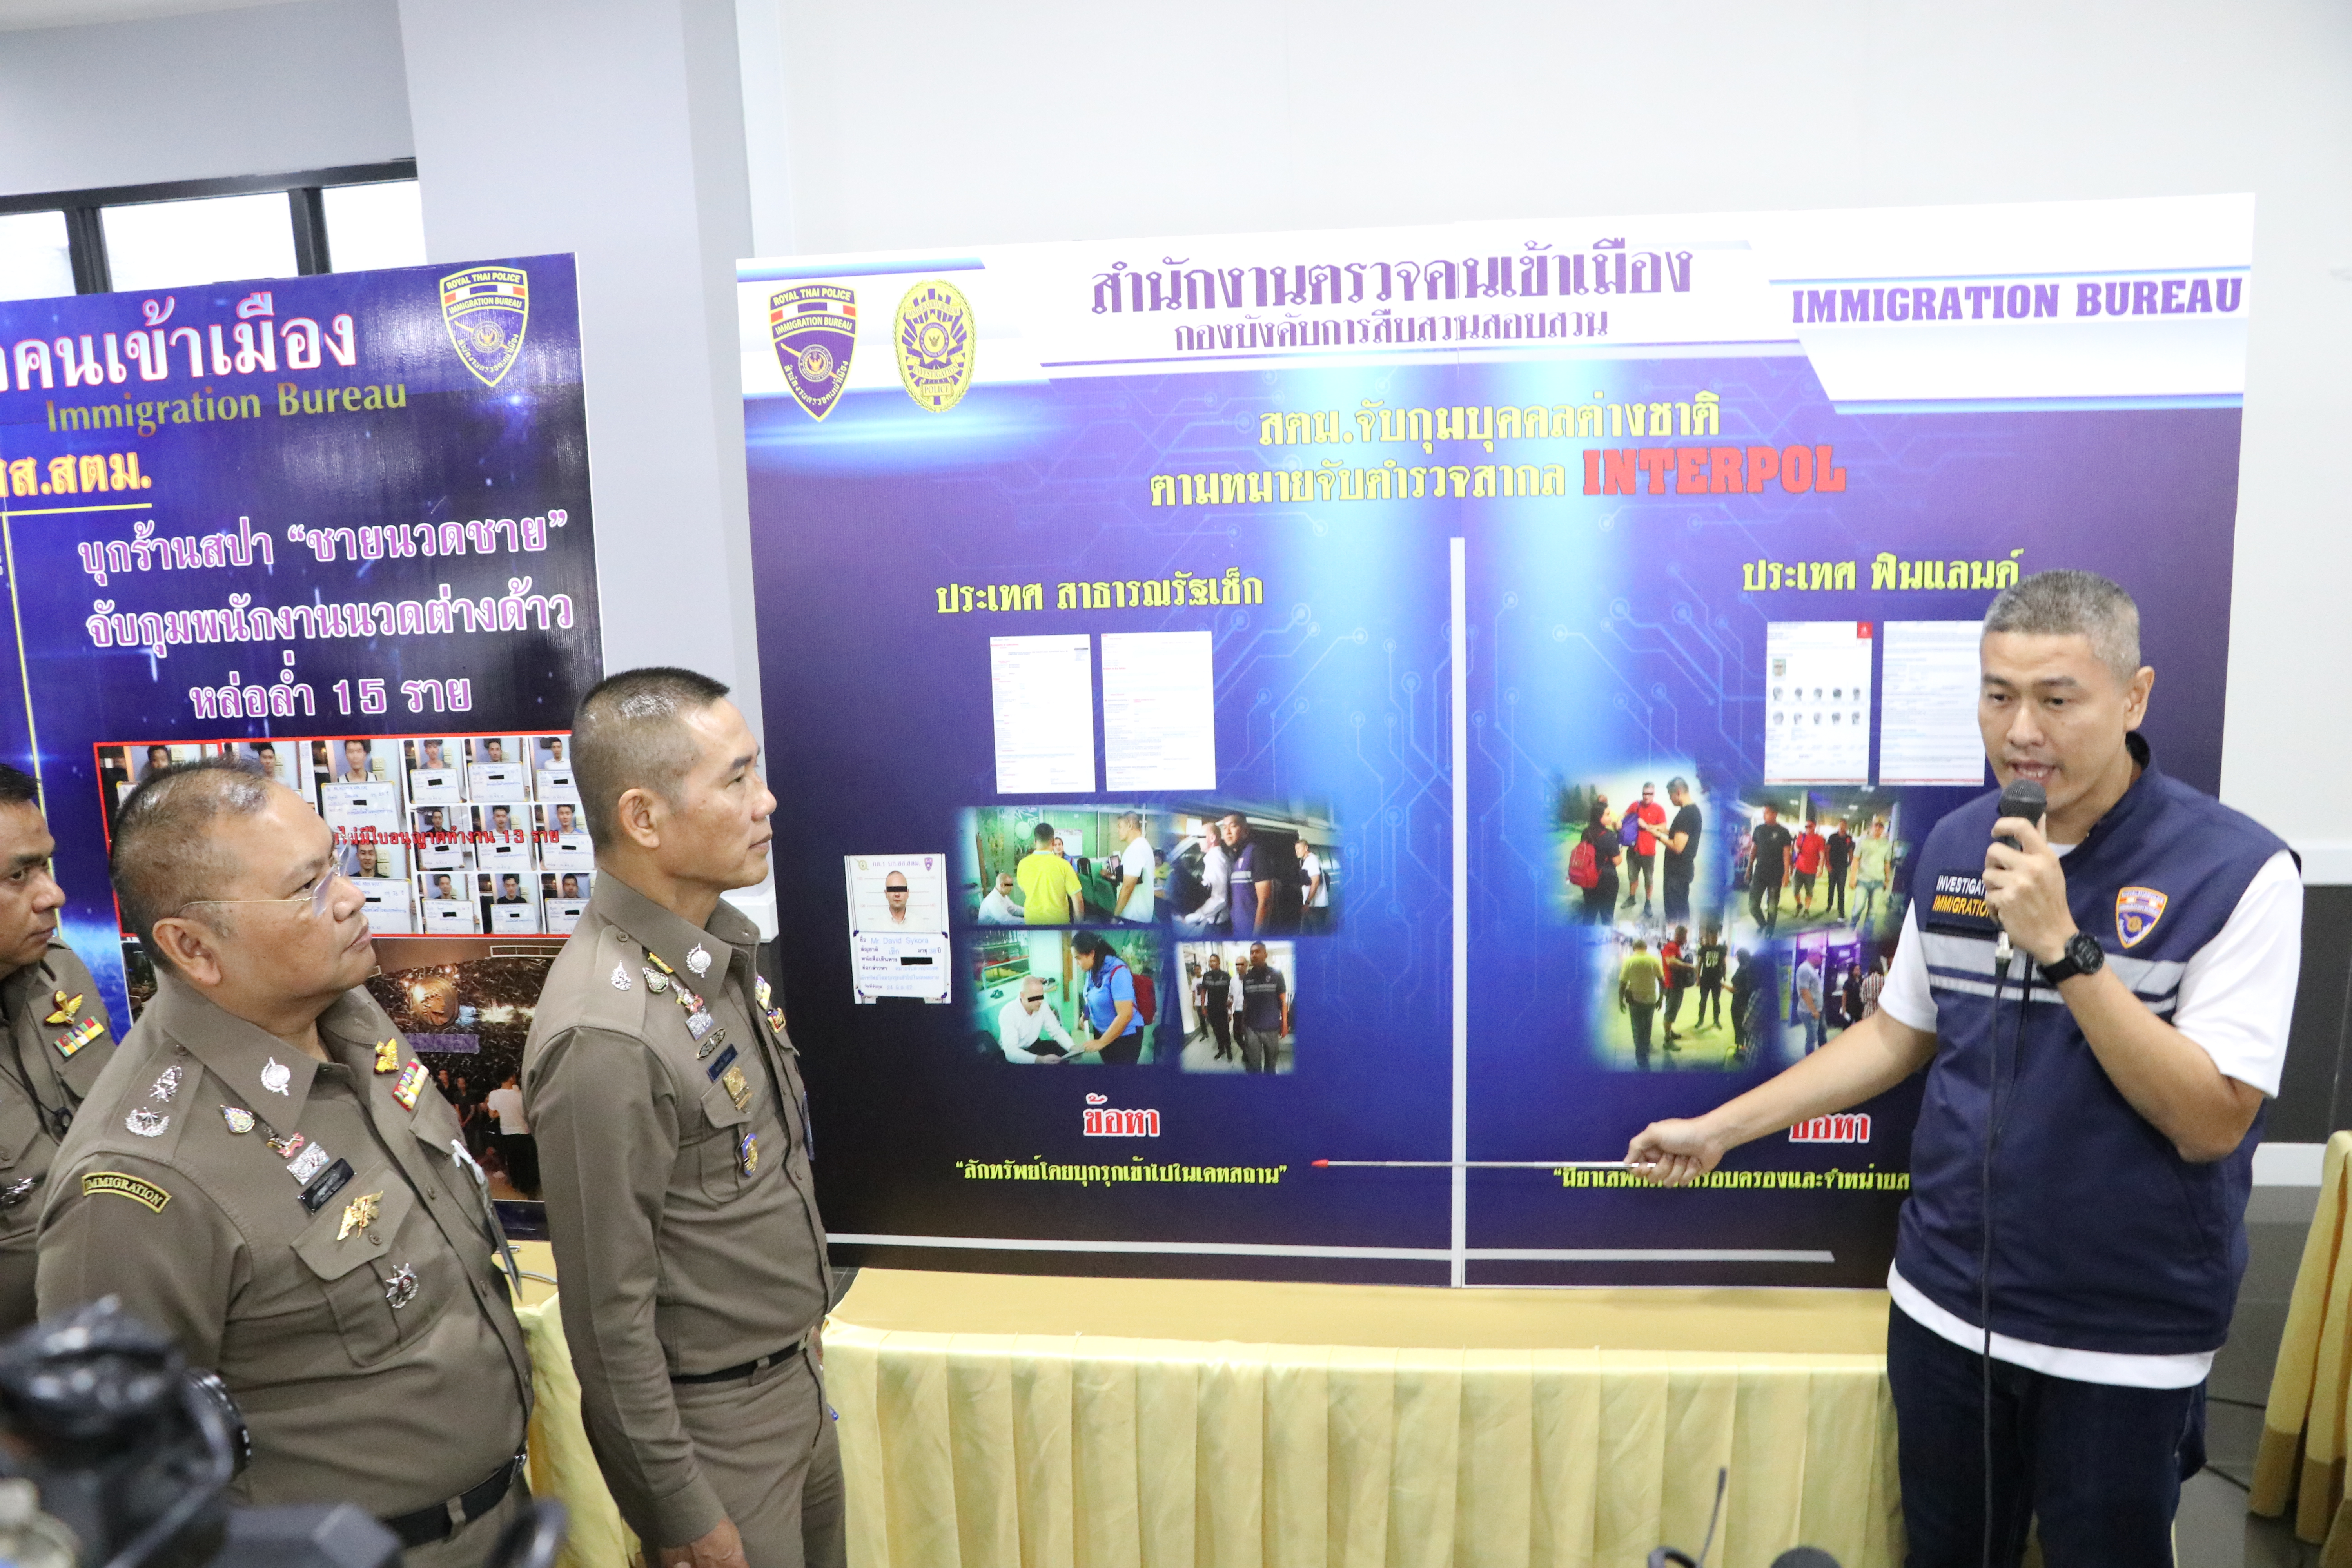 Finnish man arrested in Thailand over selling hormone